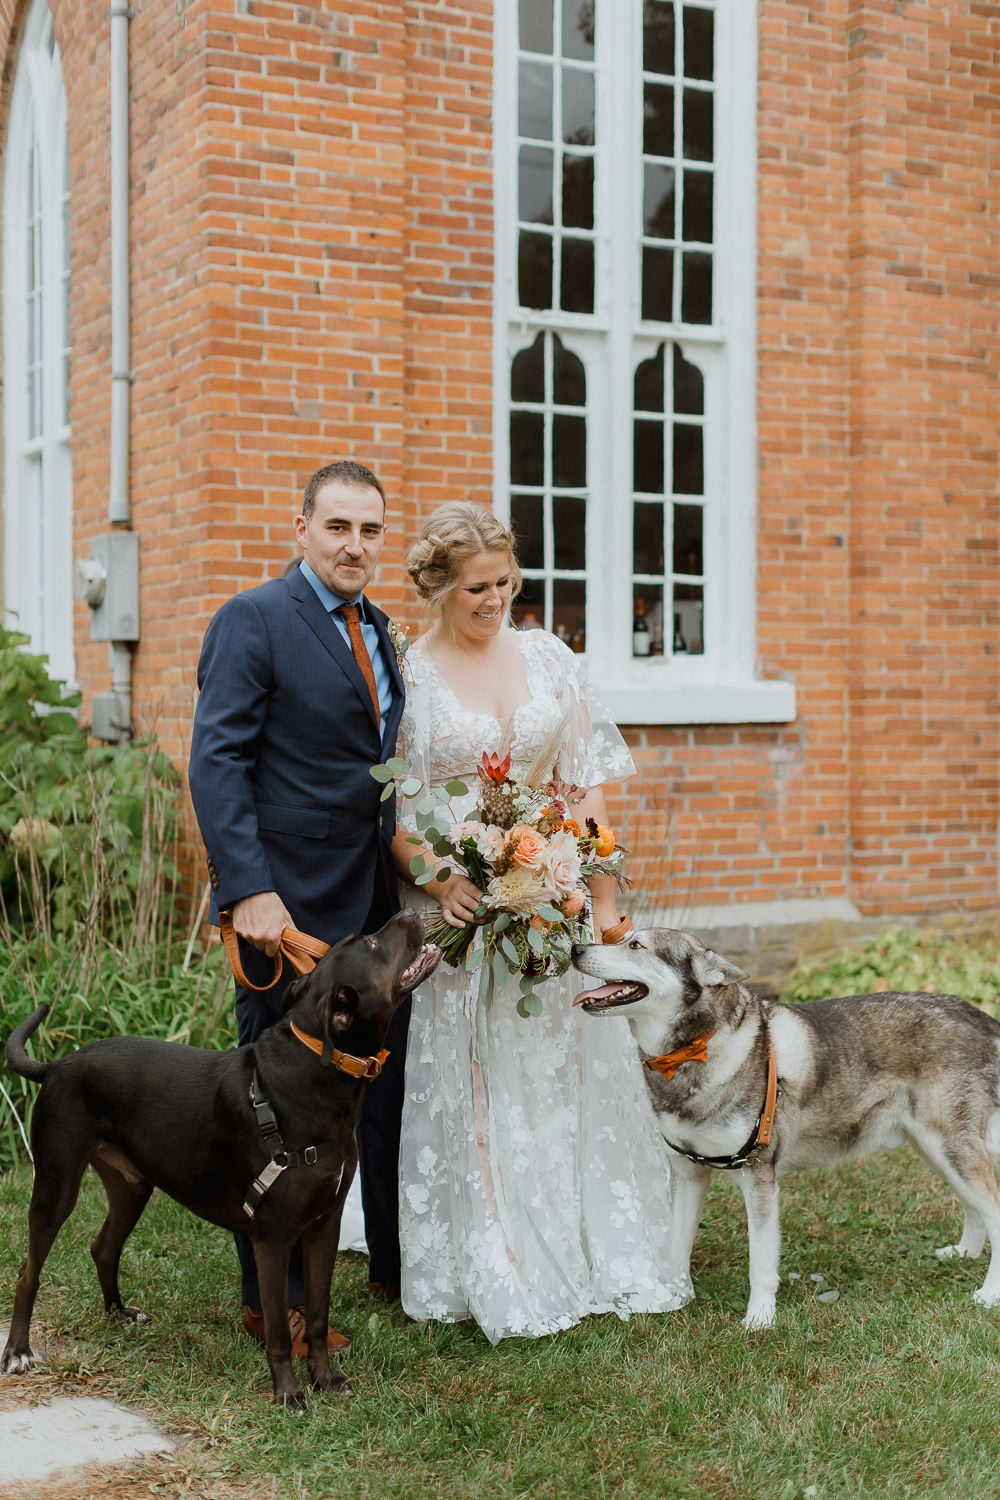 Dogs walk bride down the aisle Rainy-fall-wedding-at-The-Knox-Merickville-by- Sonia V Photo - Documentary Style Candid Photographer - Ottawa Ontario Kemptville Destination Photographer - Authentic Colour Photography - Wedding Photographer - Branding Photographer - Small Business Headshots - Engagement Photos - Family Portraits - Lifestyle